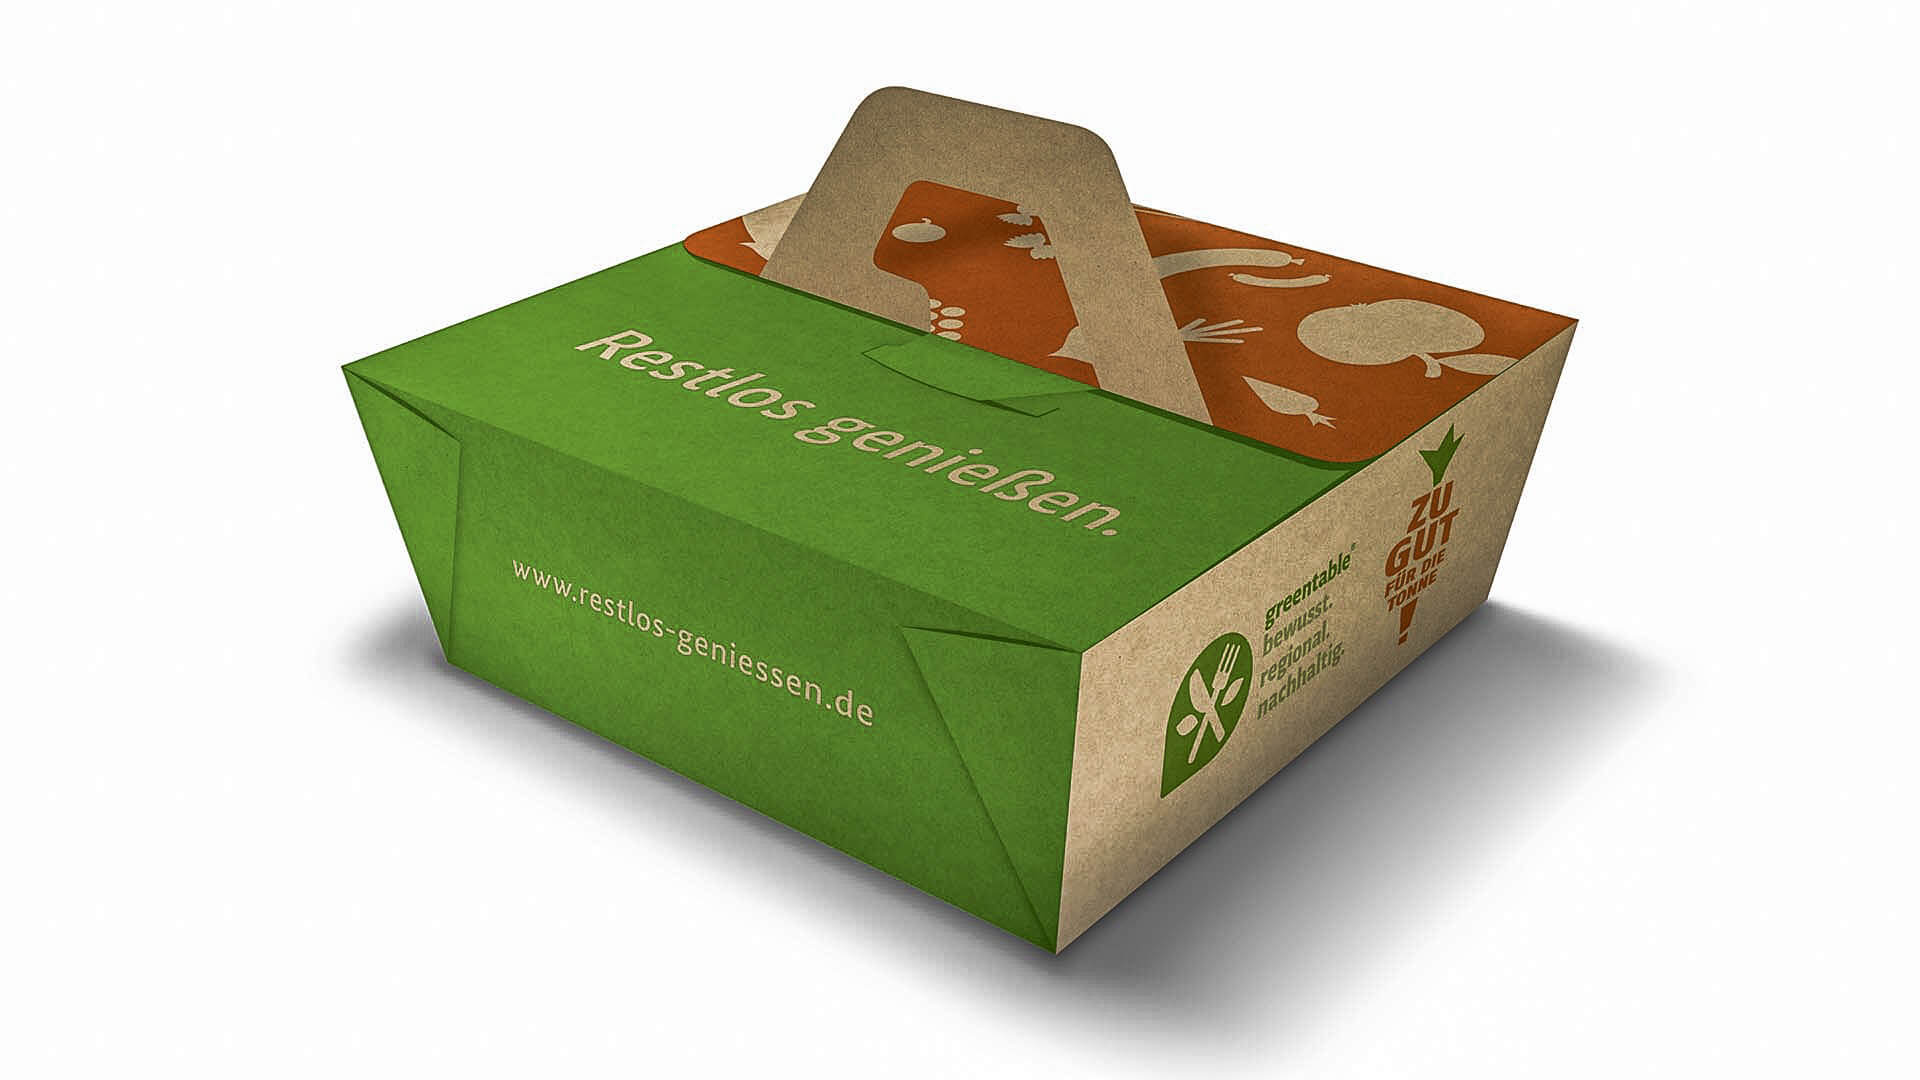 Special project “Ecological packaging for food remnants to avoid waste